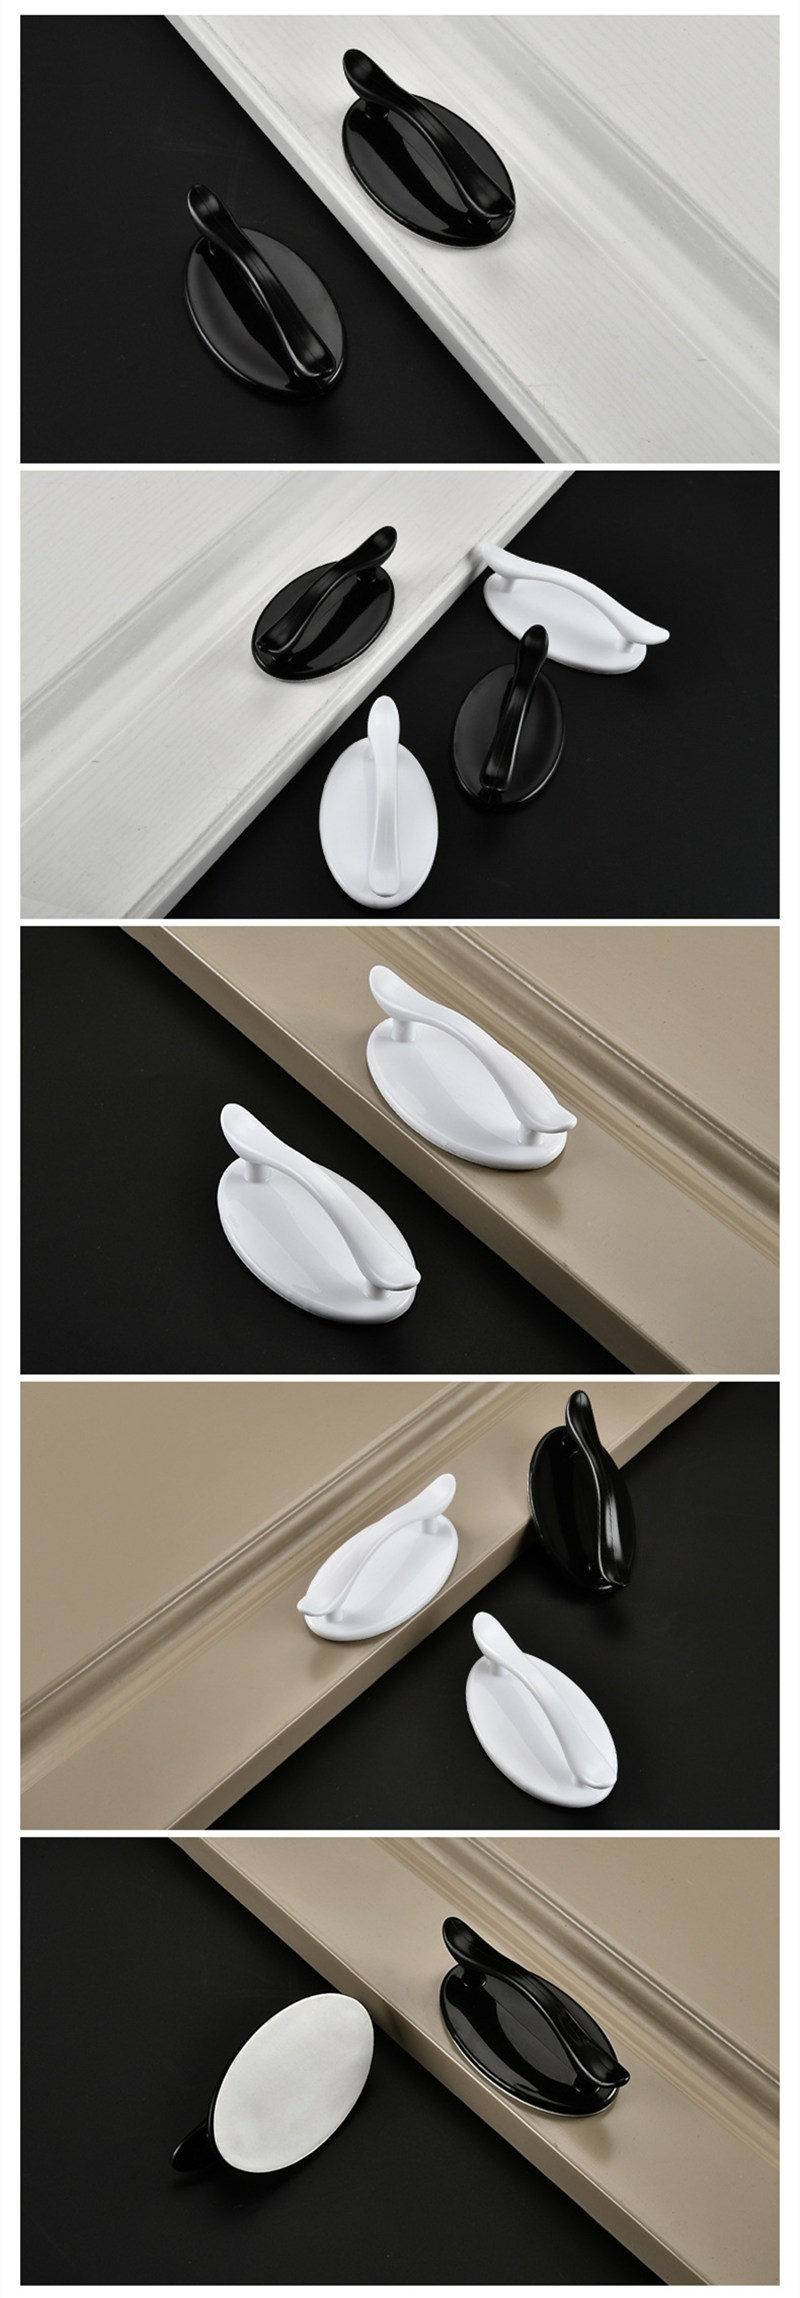 2pcs4pcs-Punch-free-Handle-For-Cabinet-Window-Door-Drawer-Push-pull-Assistant-Self-Stick-Pull-Handle-1815743-6